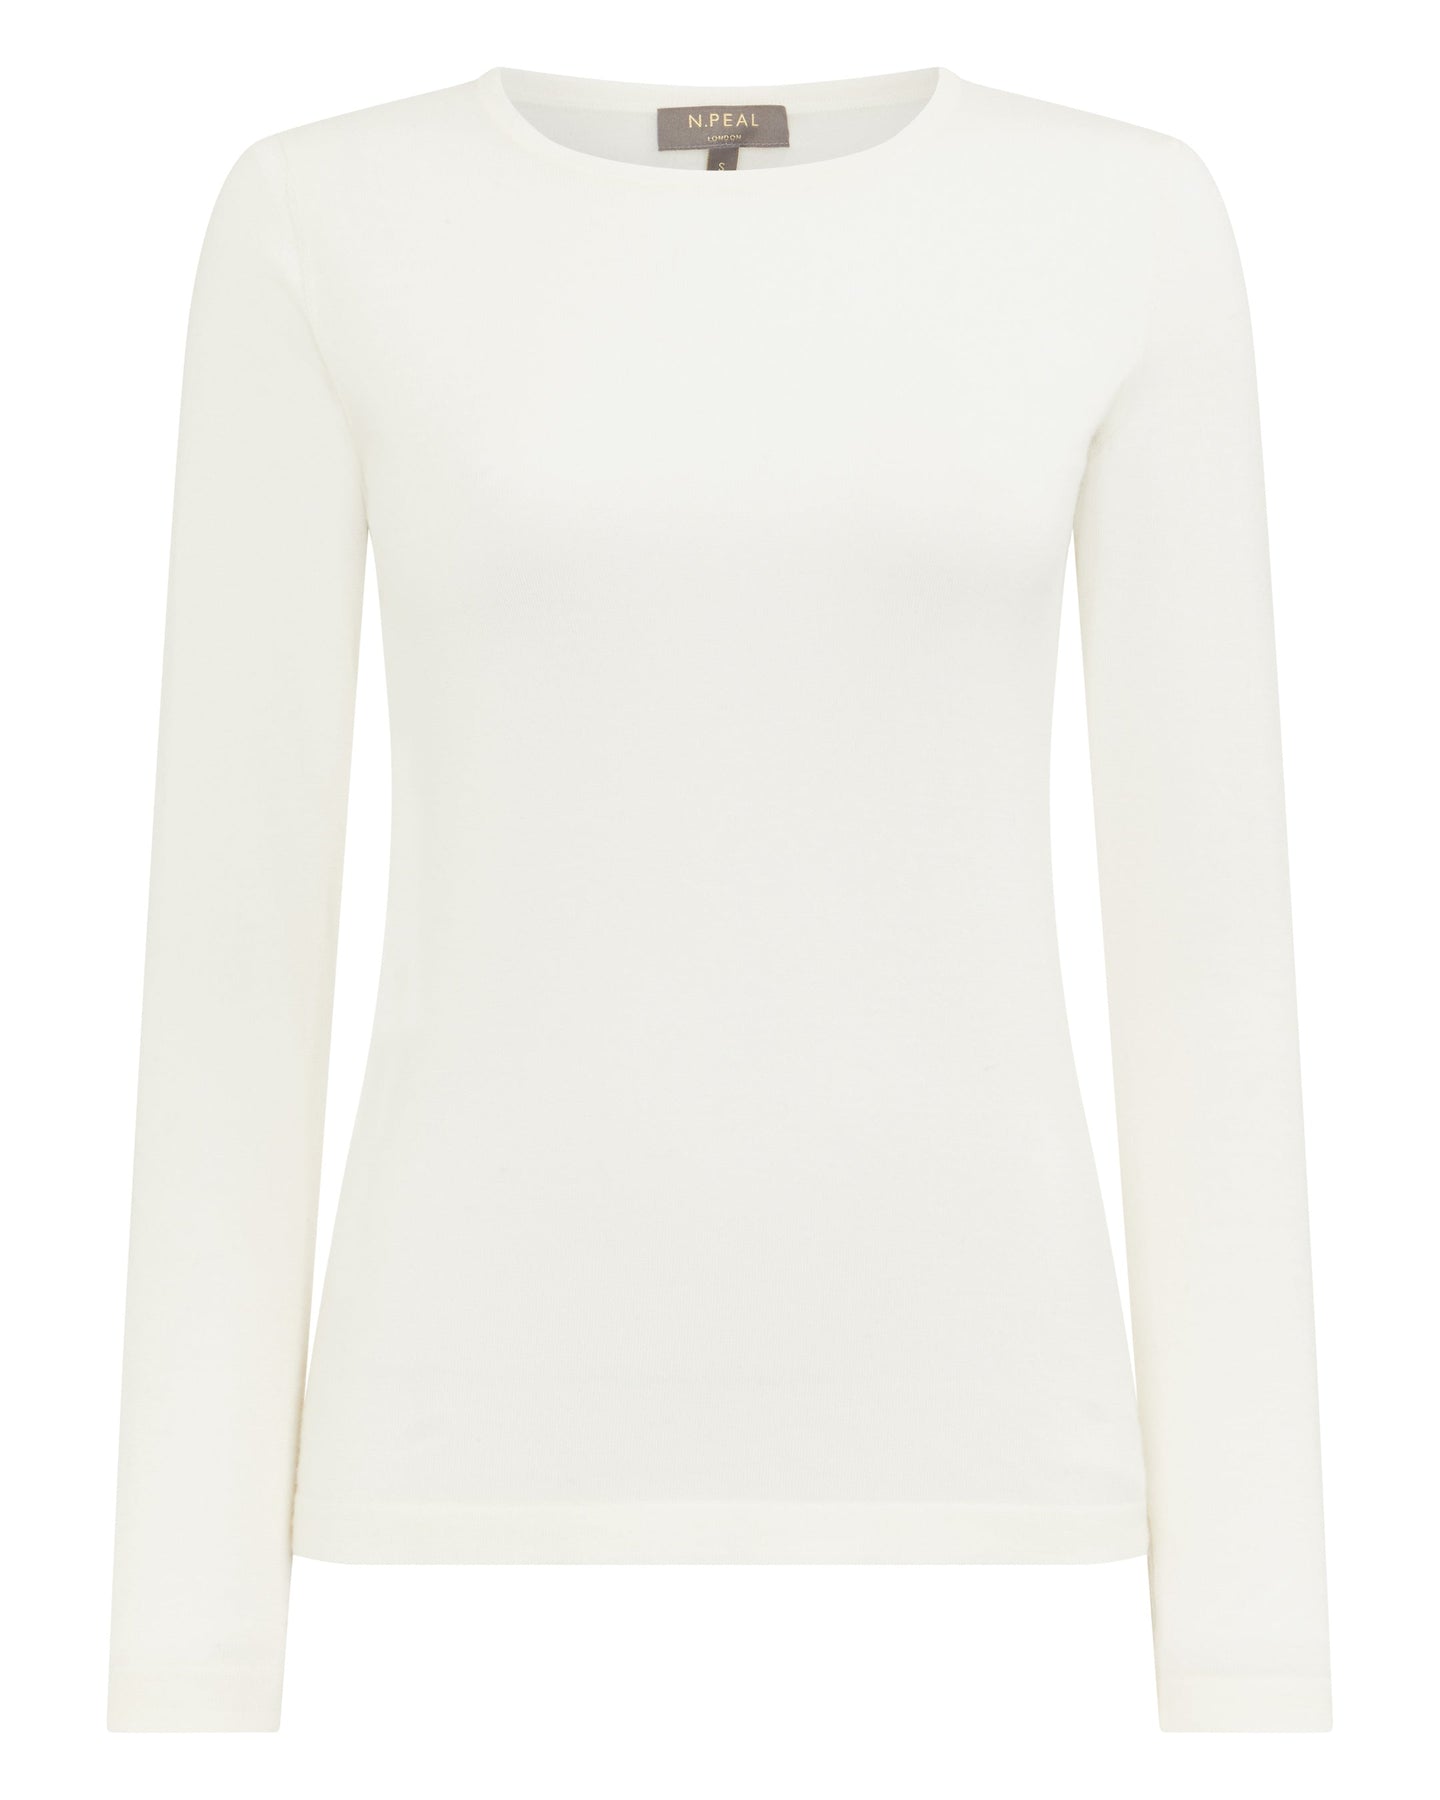 N.Peal Women's Superfine Long Sleeve Cashmere Top New Ivory White